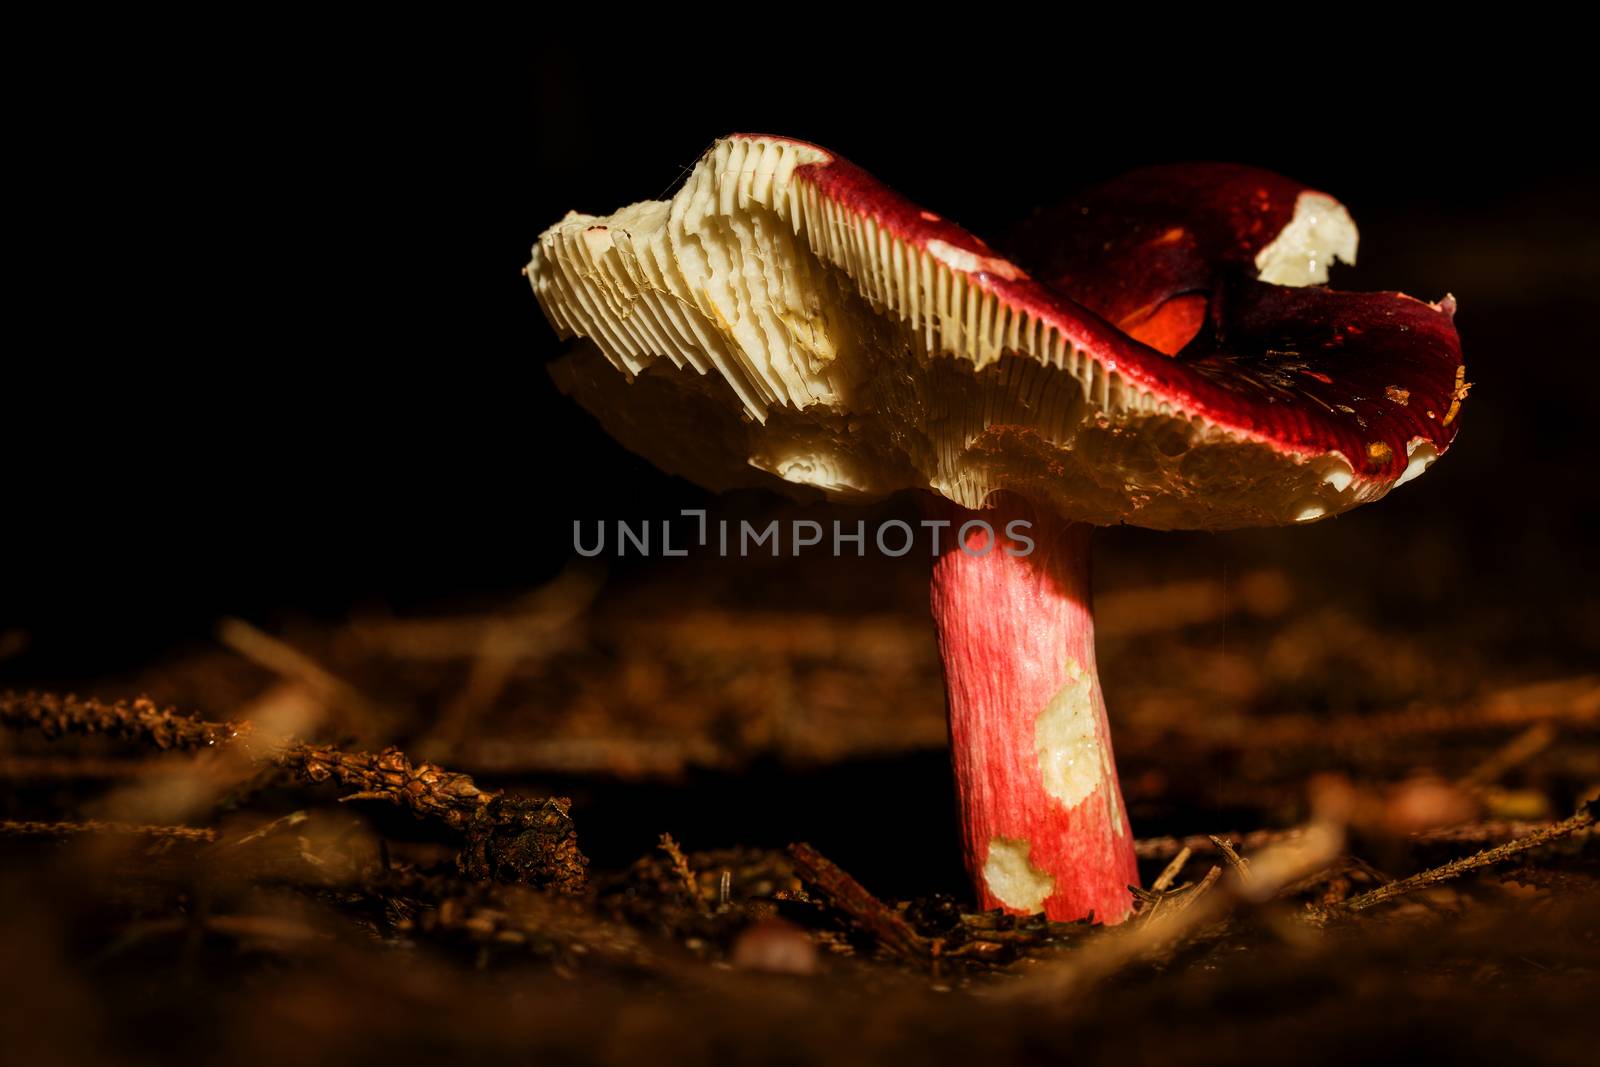 Little red mushroom in the forrest